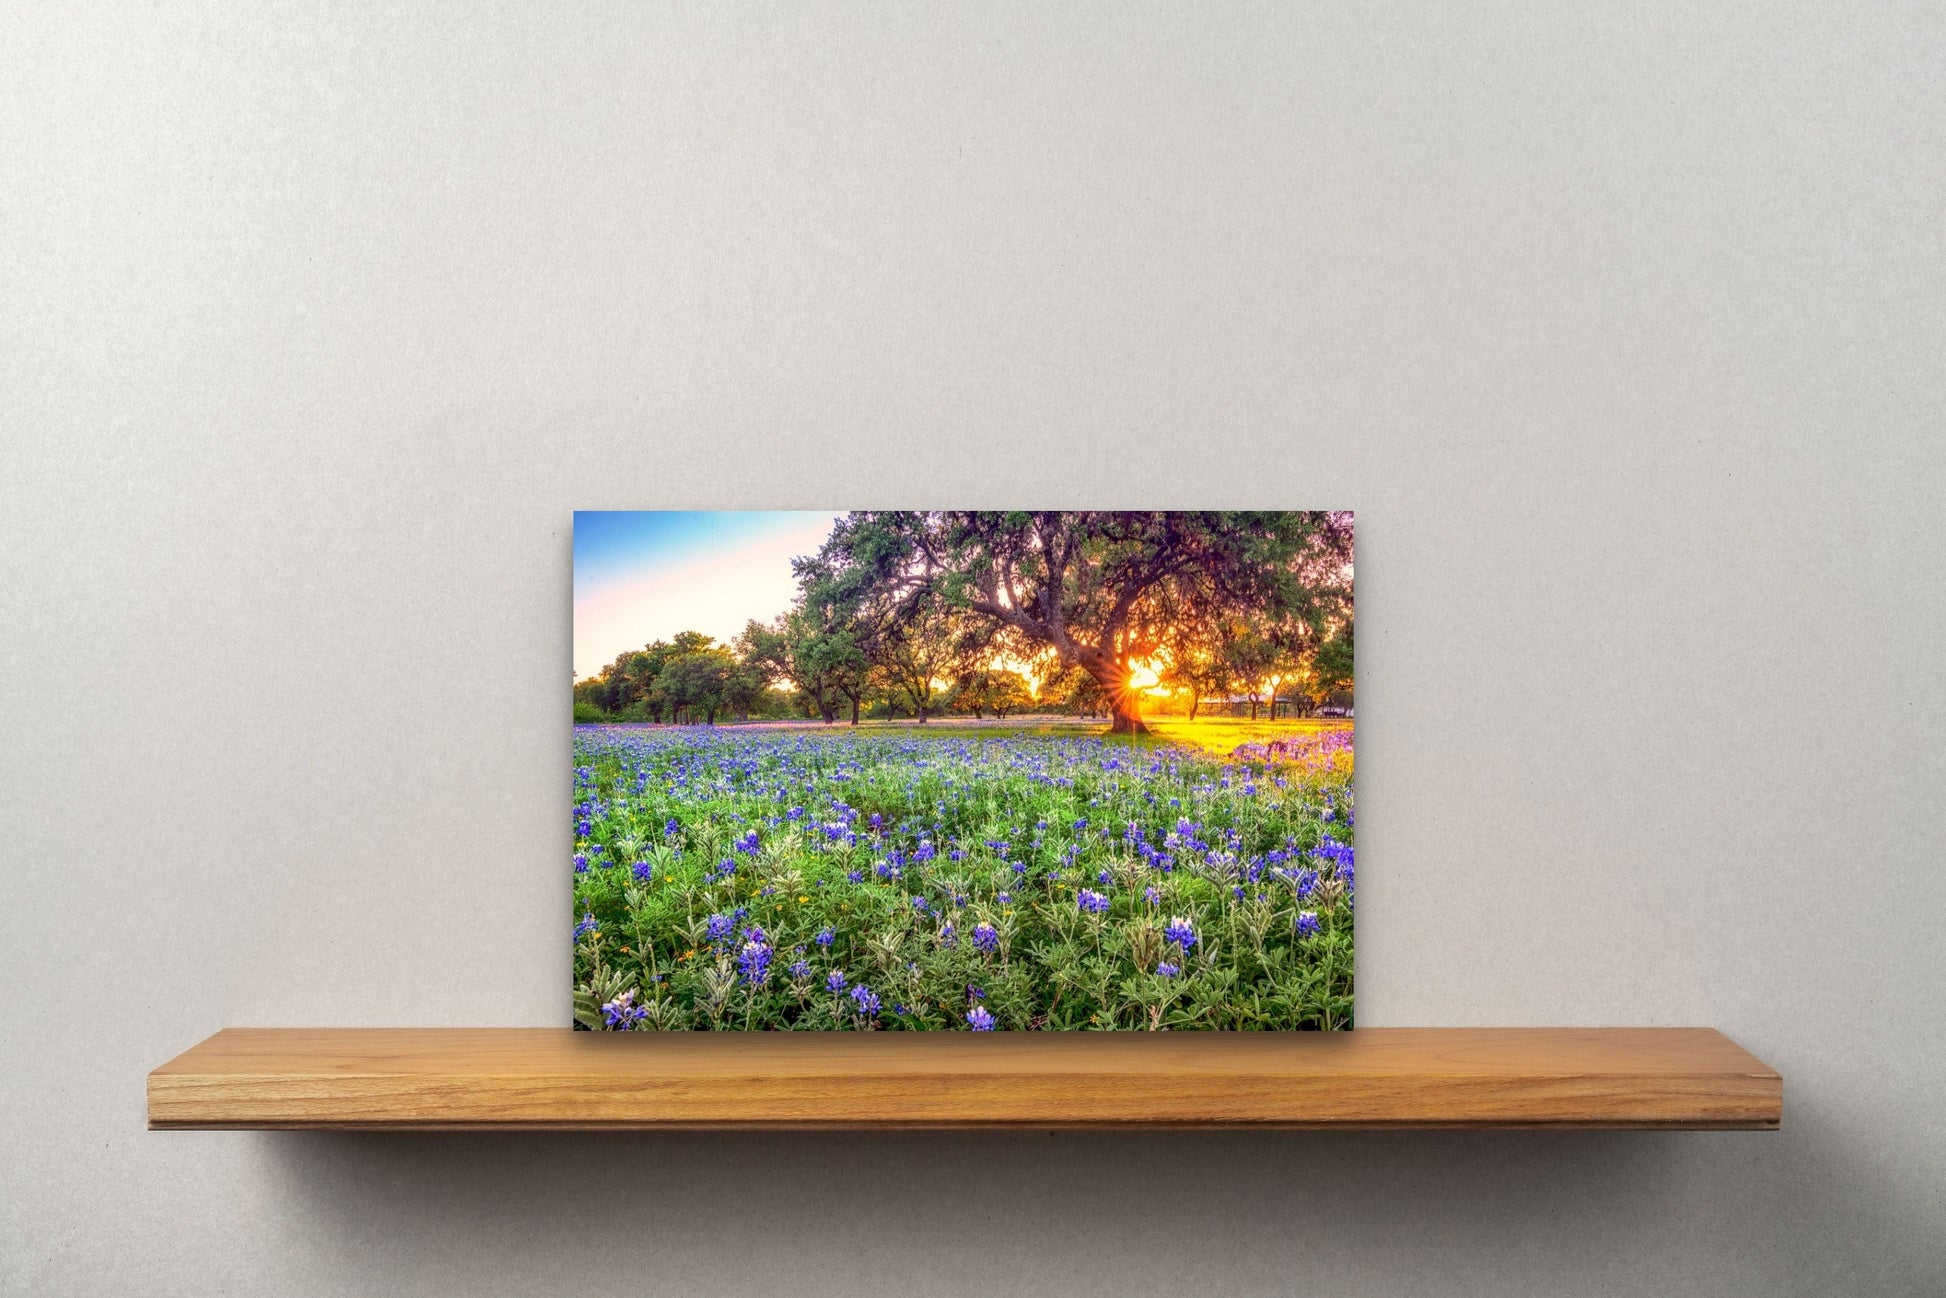 Wimberley Puzzle Company Posters, Prints, & Visual Artwork 10x15" Johnson City Bluebonnet Sunset, Texas Wooden Art and Postcards